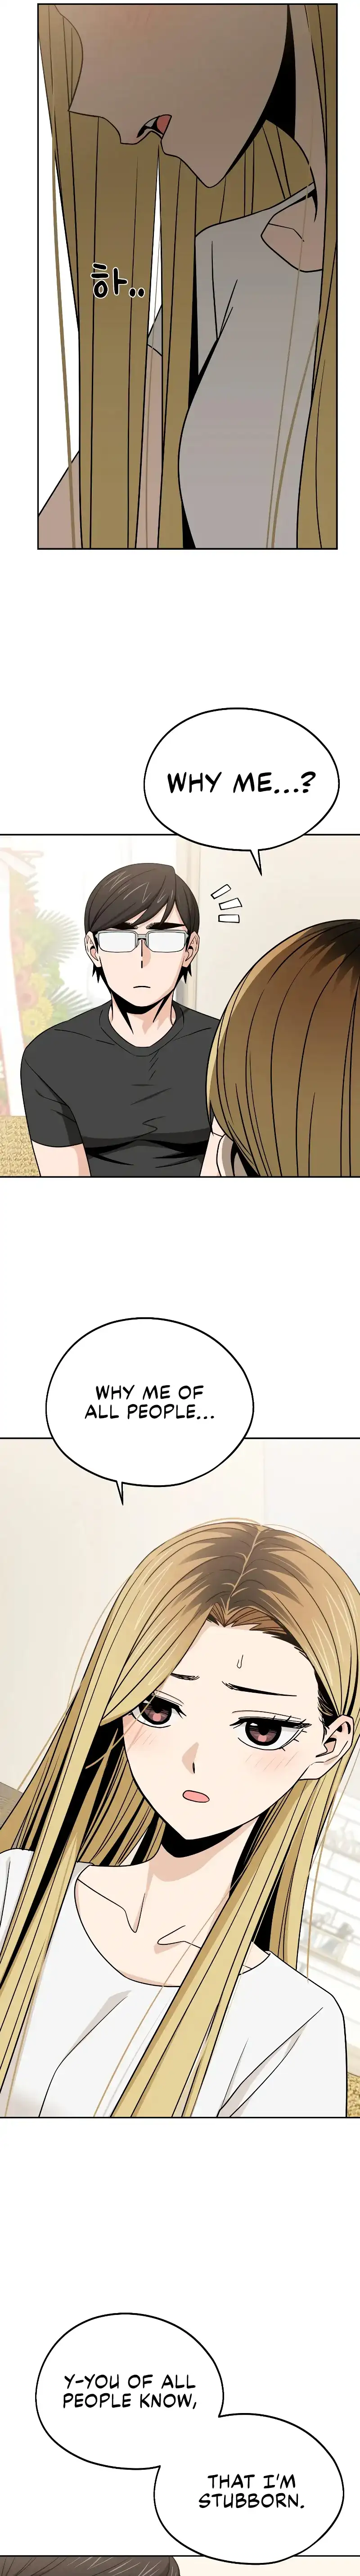 Match Made in Heaven by Chance Chapter 80 - page 9